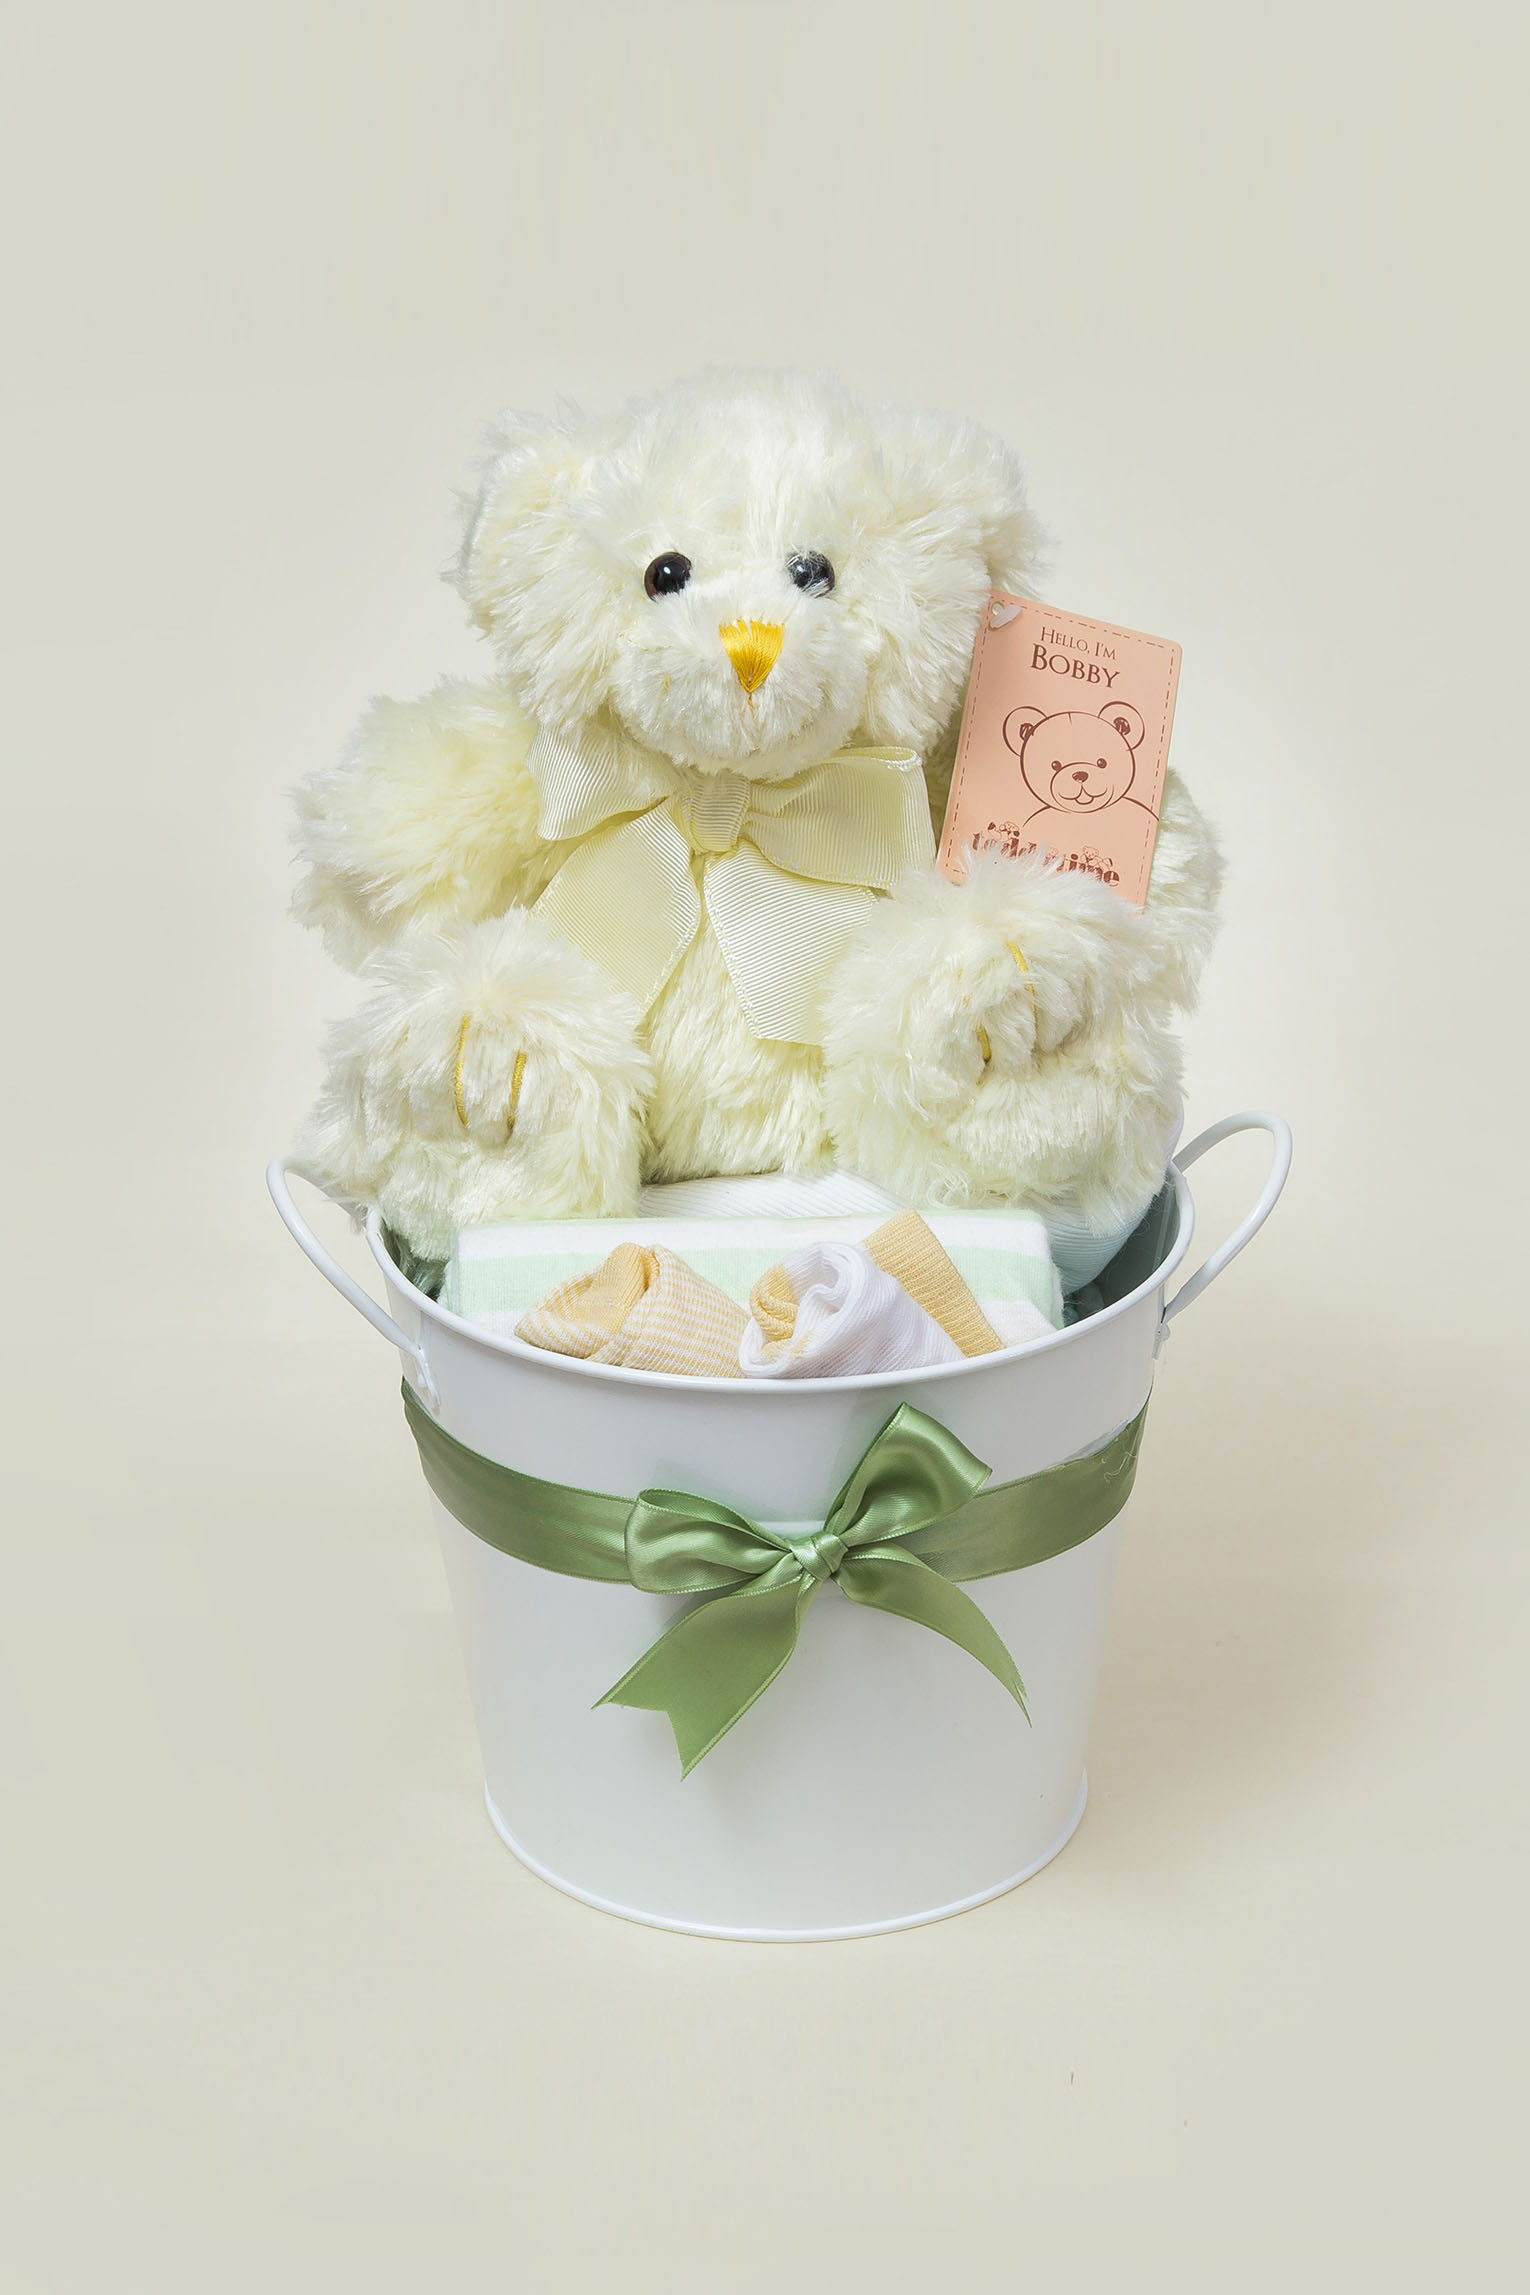 baby-stitch-penrith-product-photography-03